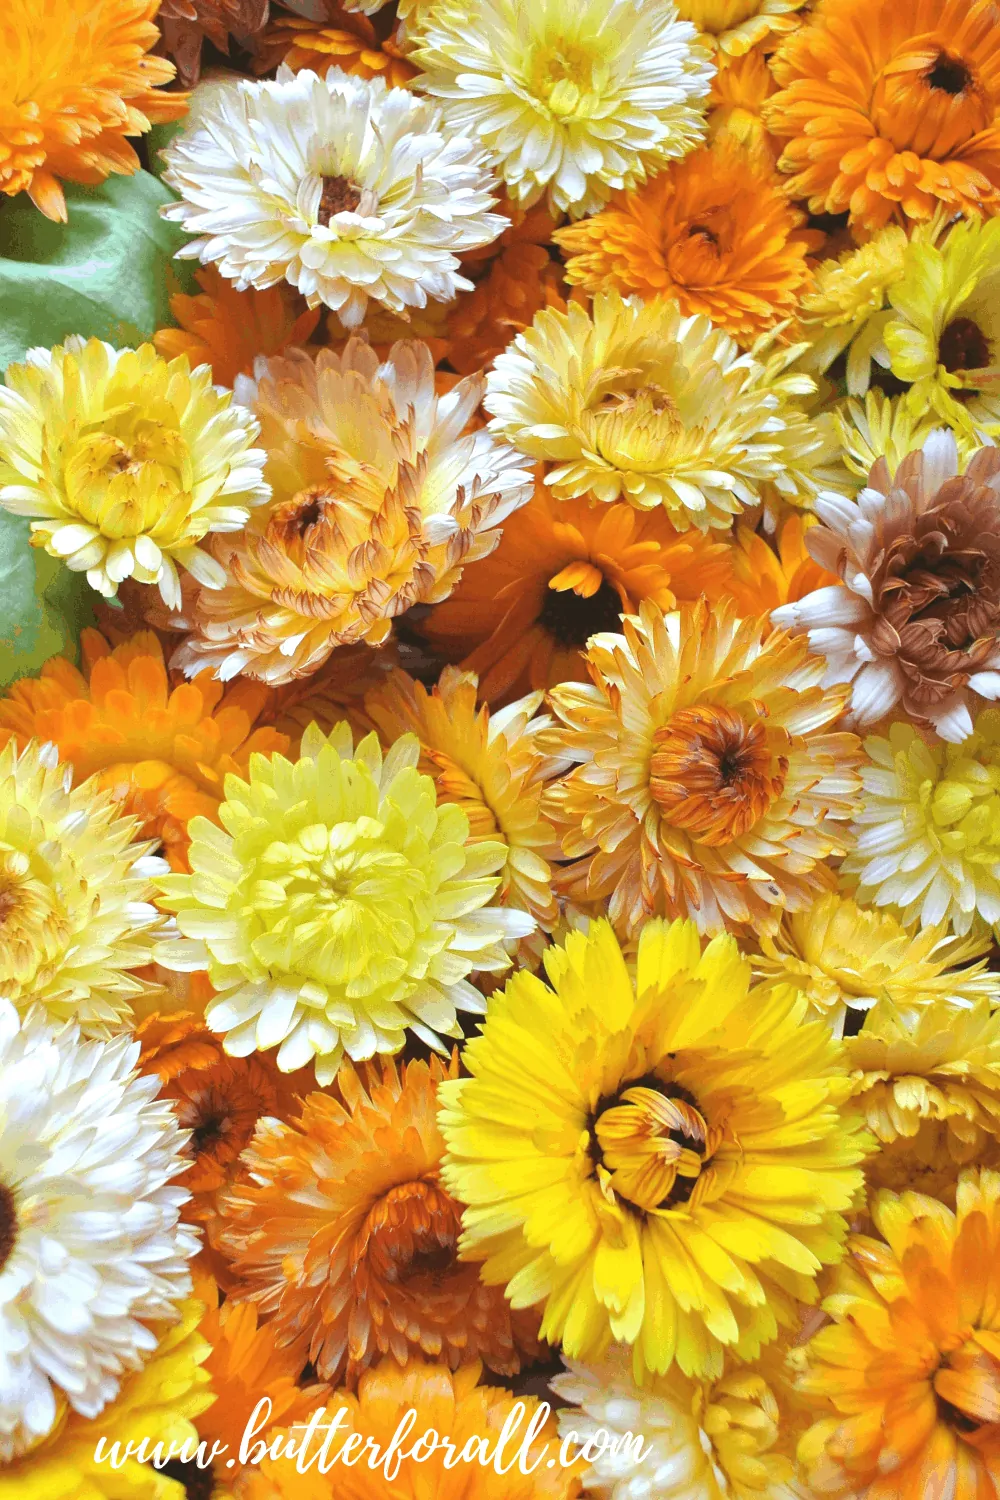 Growing, Harvesting, and Drying Calendula Flowers – With Recipes